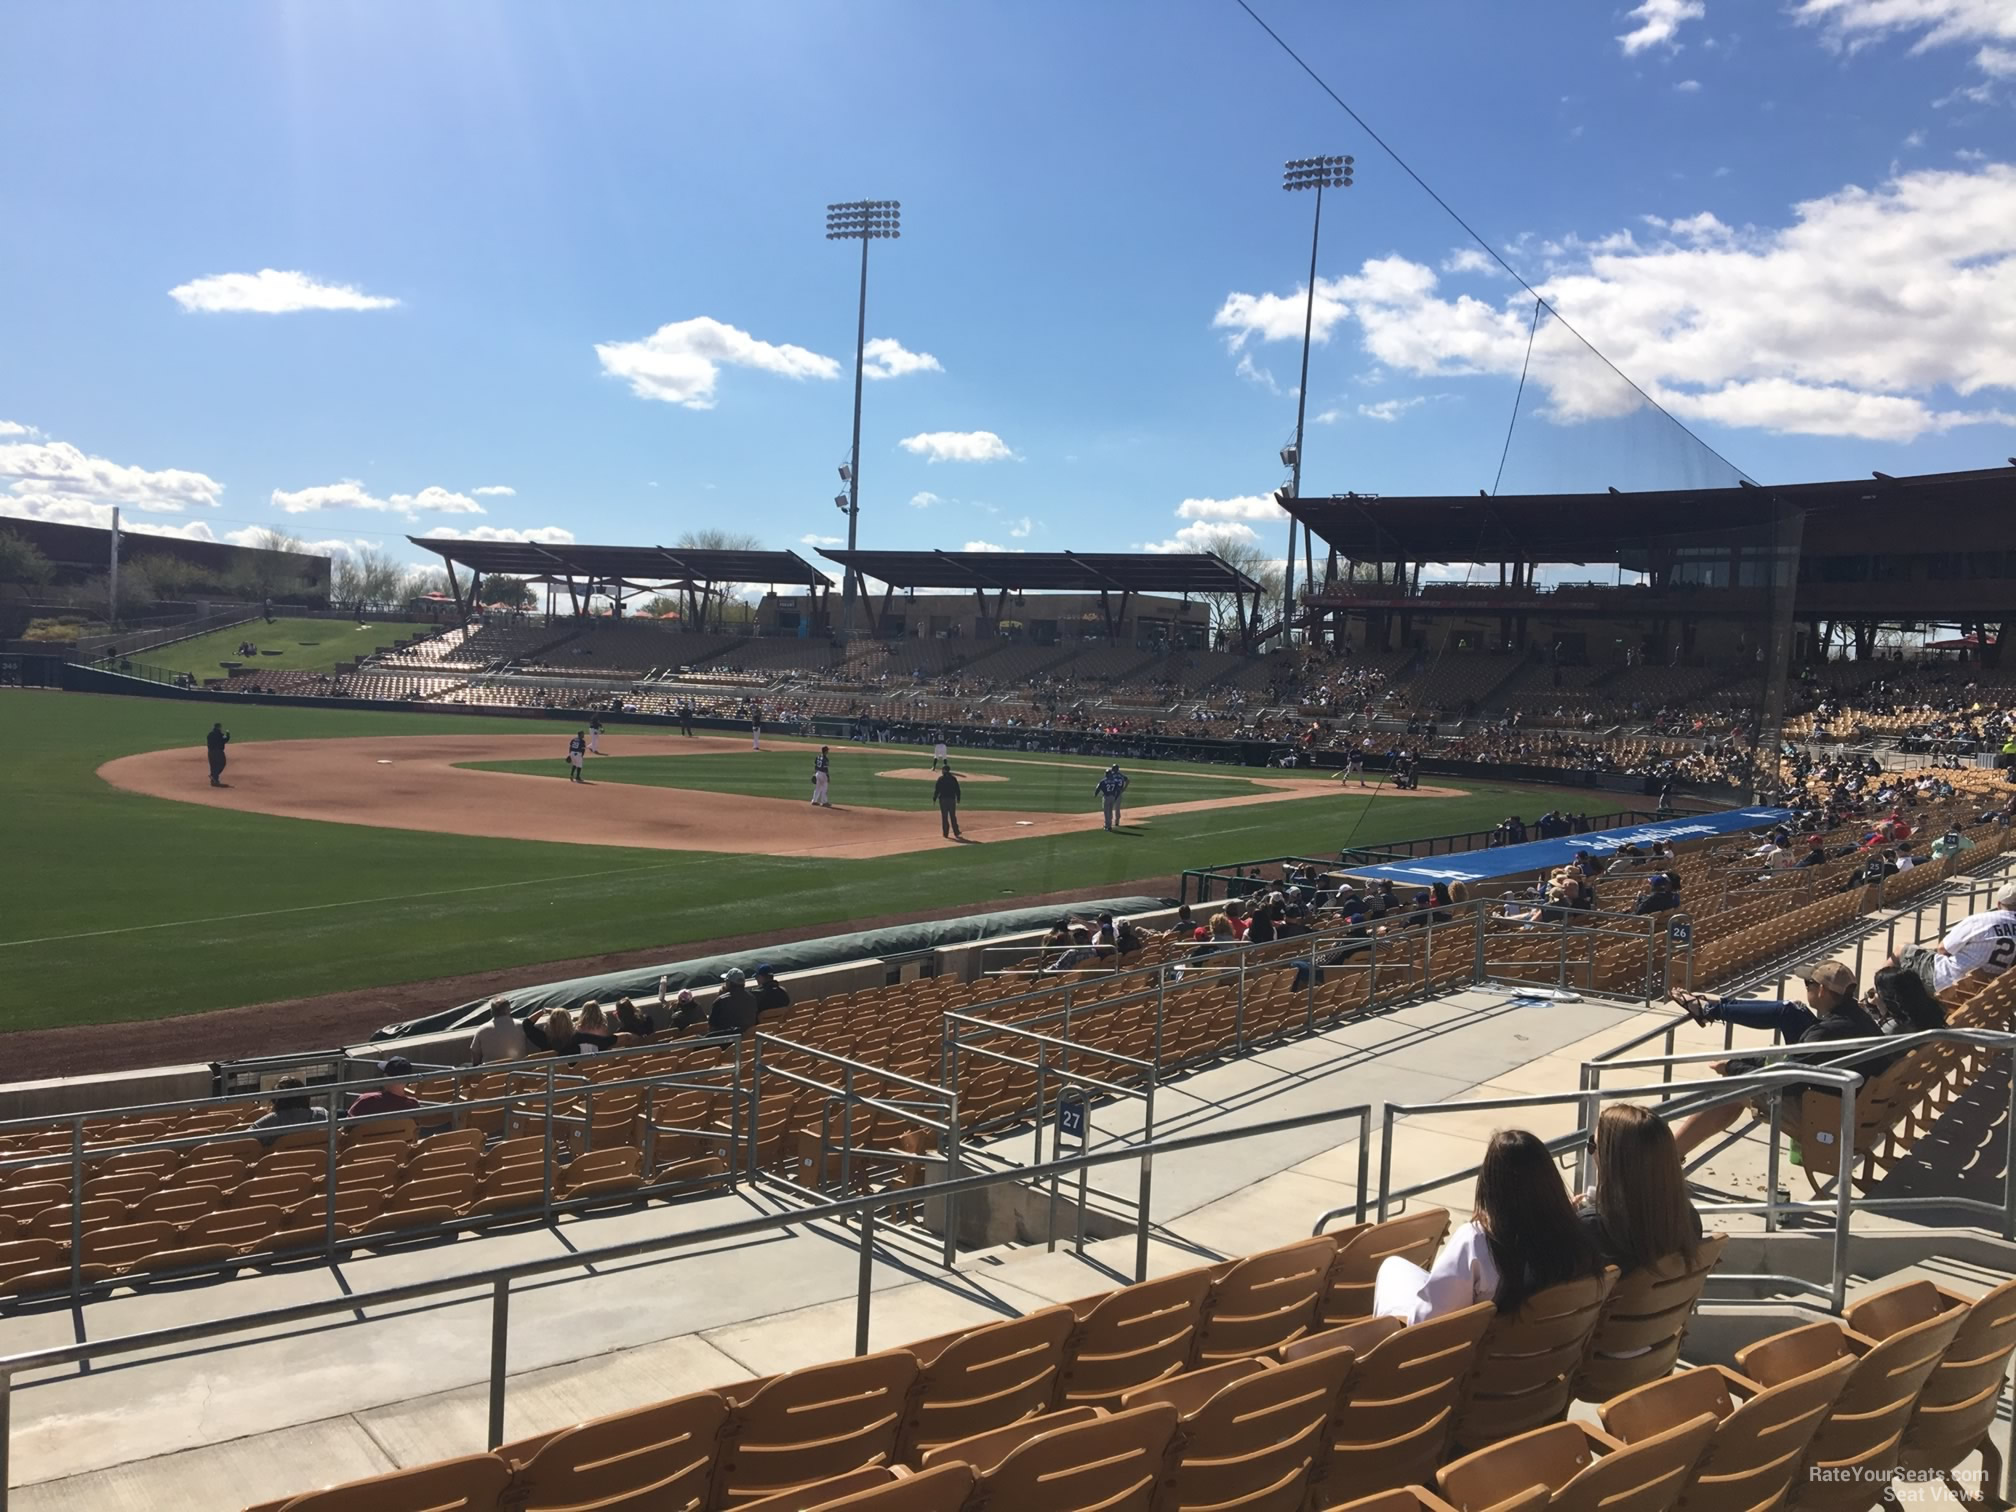 section 127, row 5 seat view  - camelback ranch